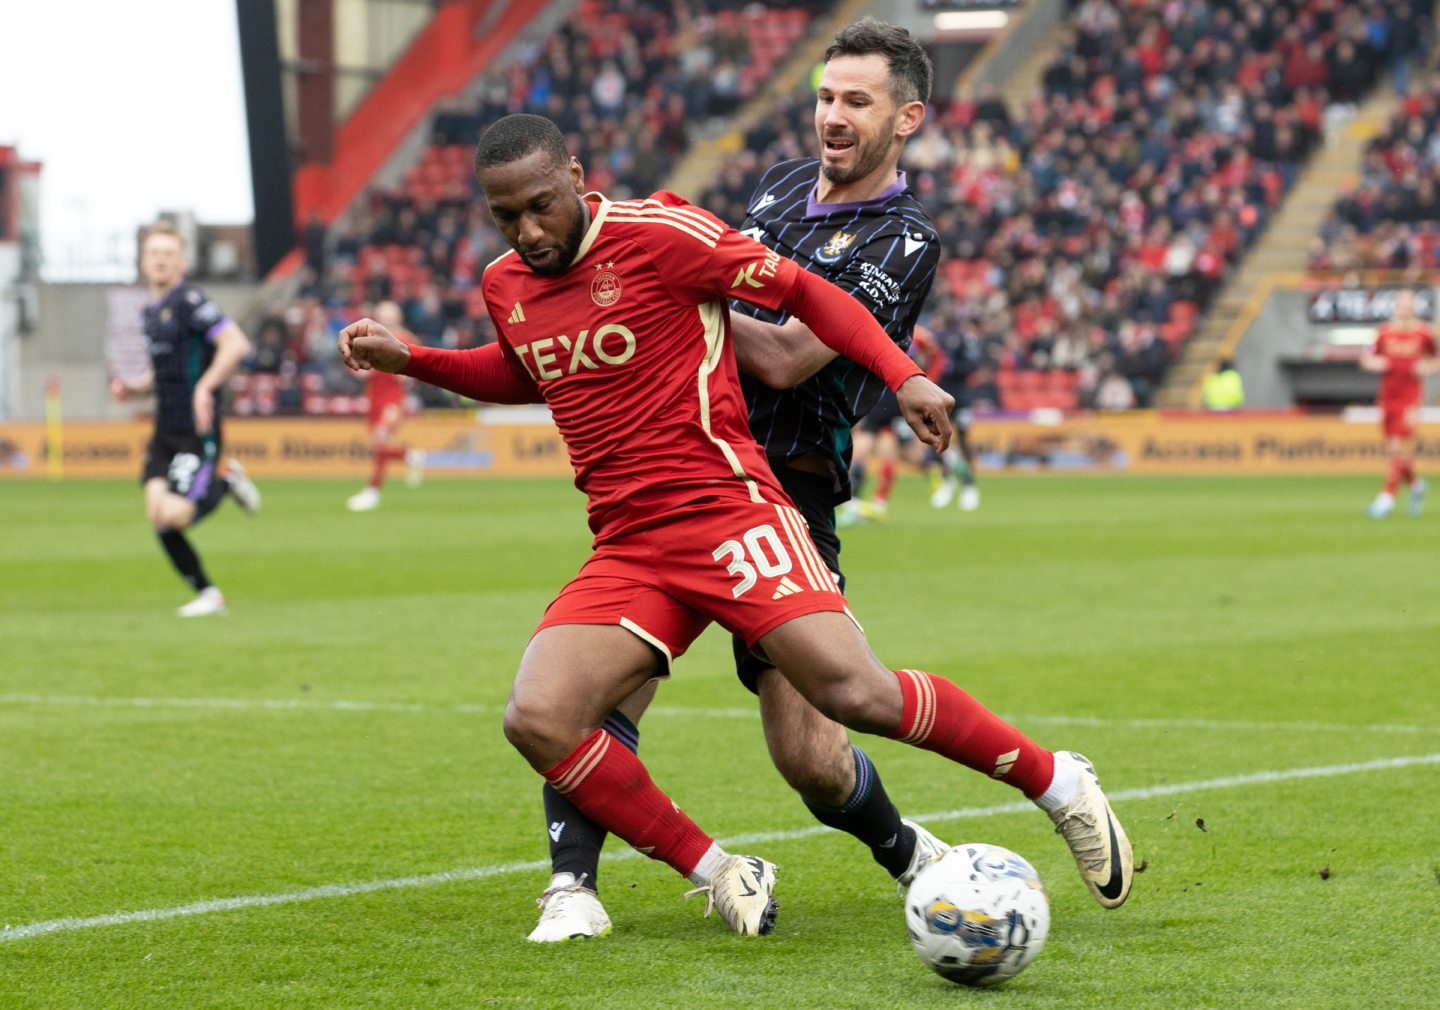 St Johnstone's Ryan MGowan and Aberdeen's Junior Hoilett in action. Image: SNS